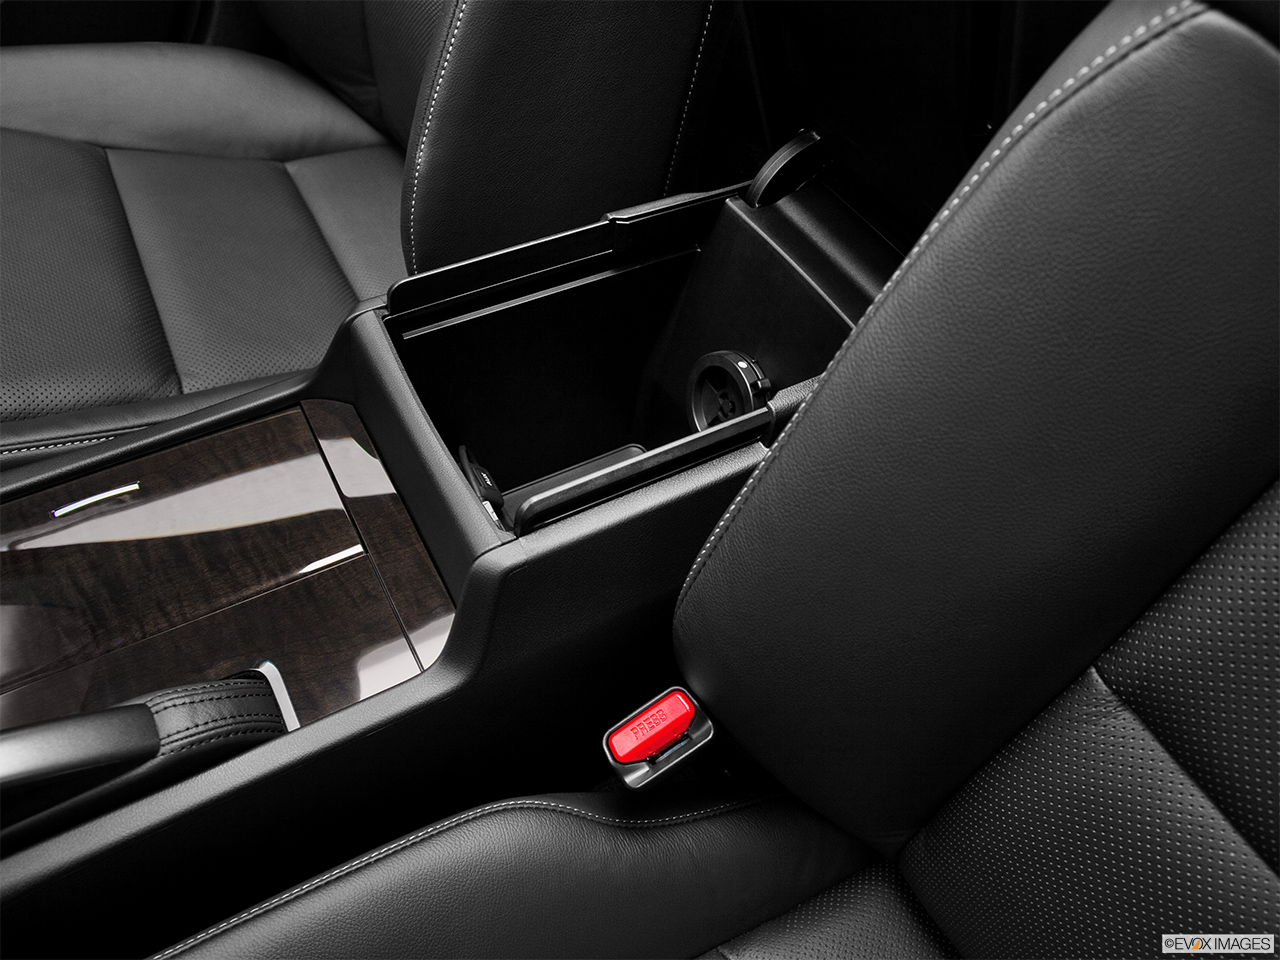 2012 Acura TSX TSX 5-speed Automatic Front center divider. 